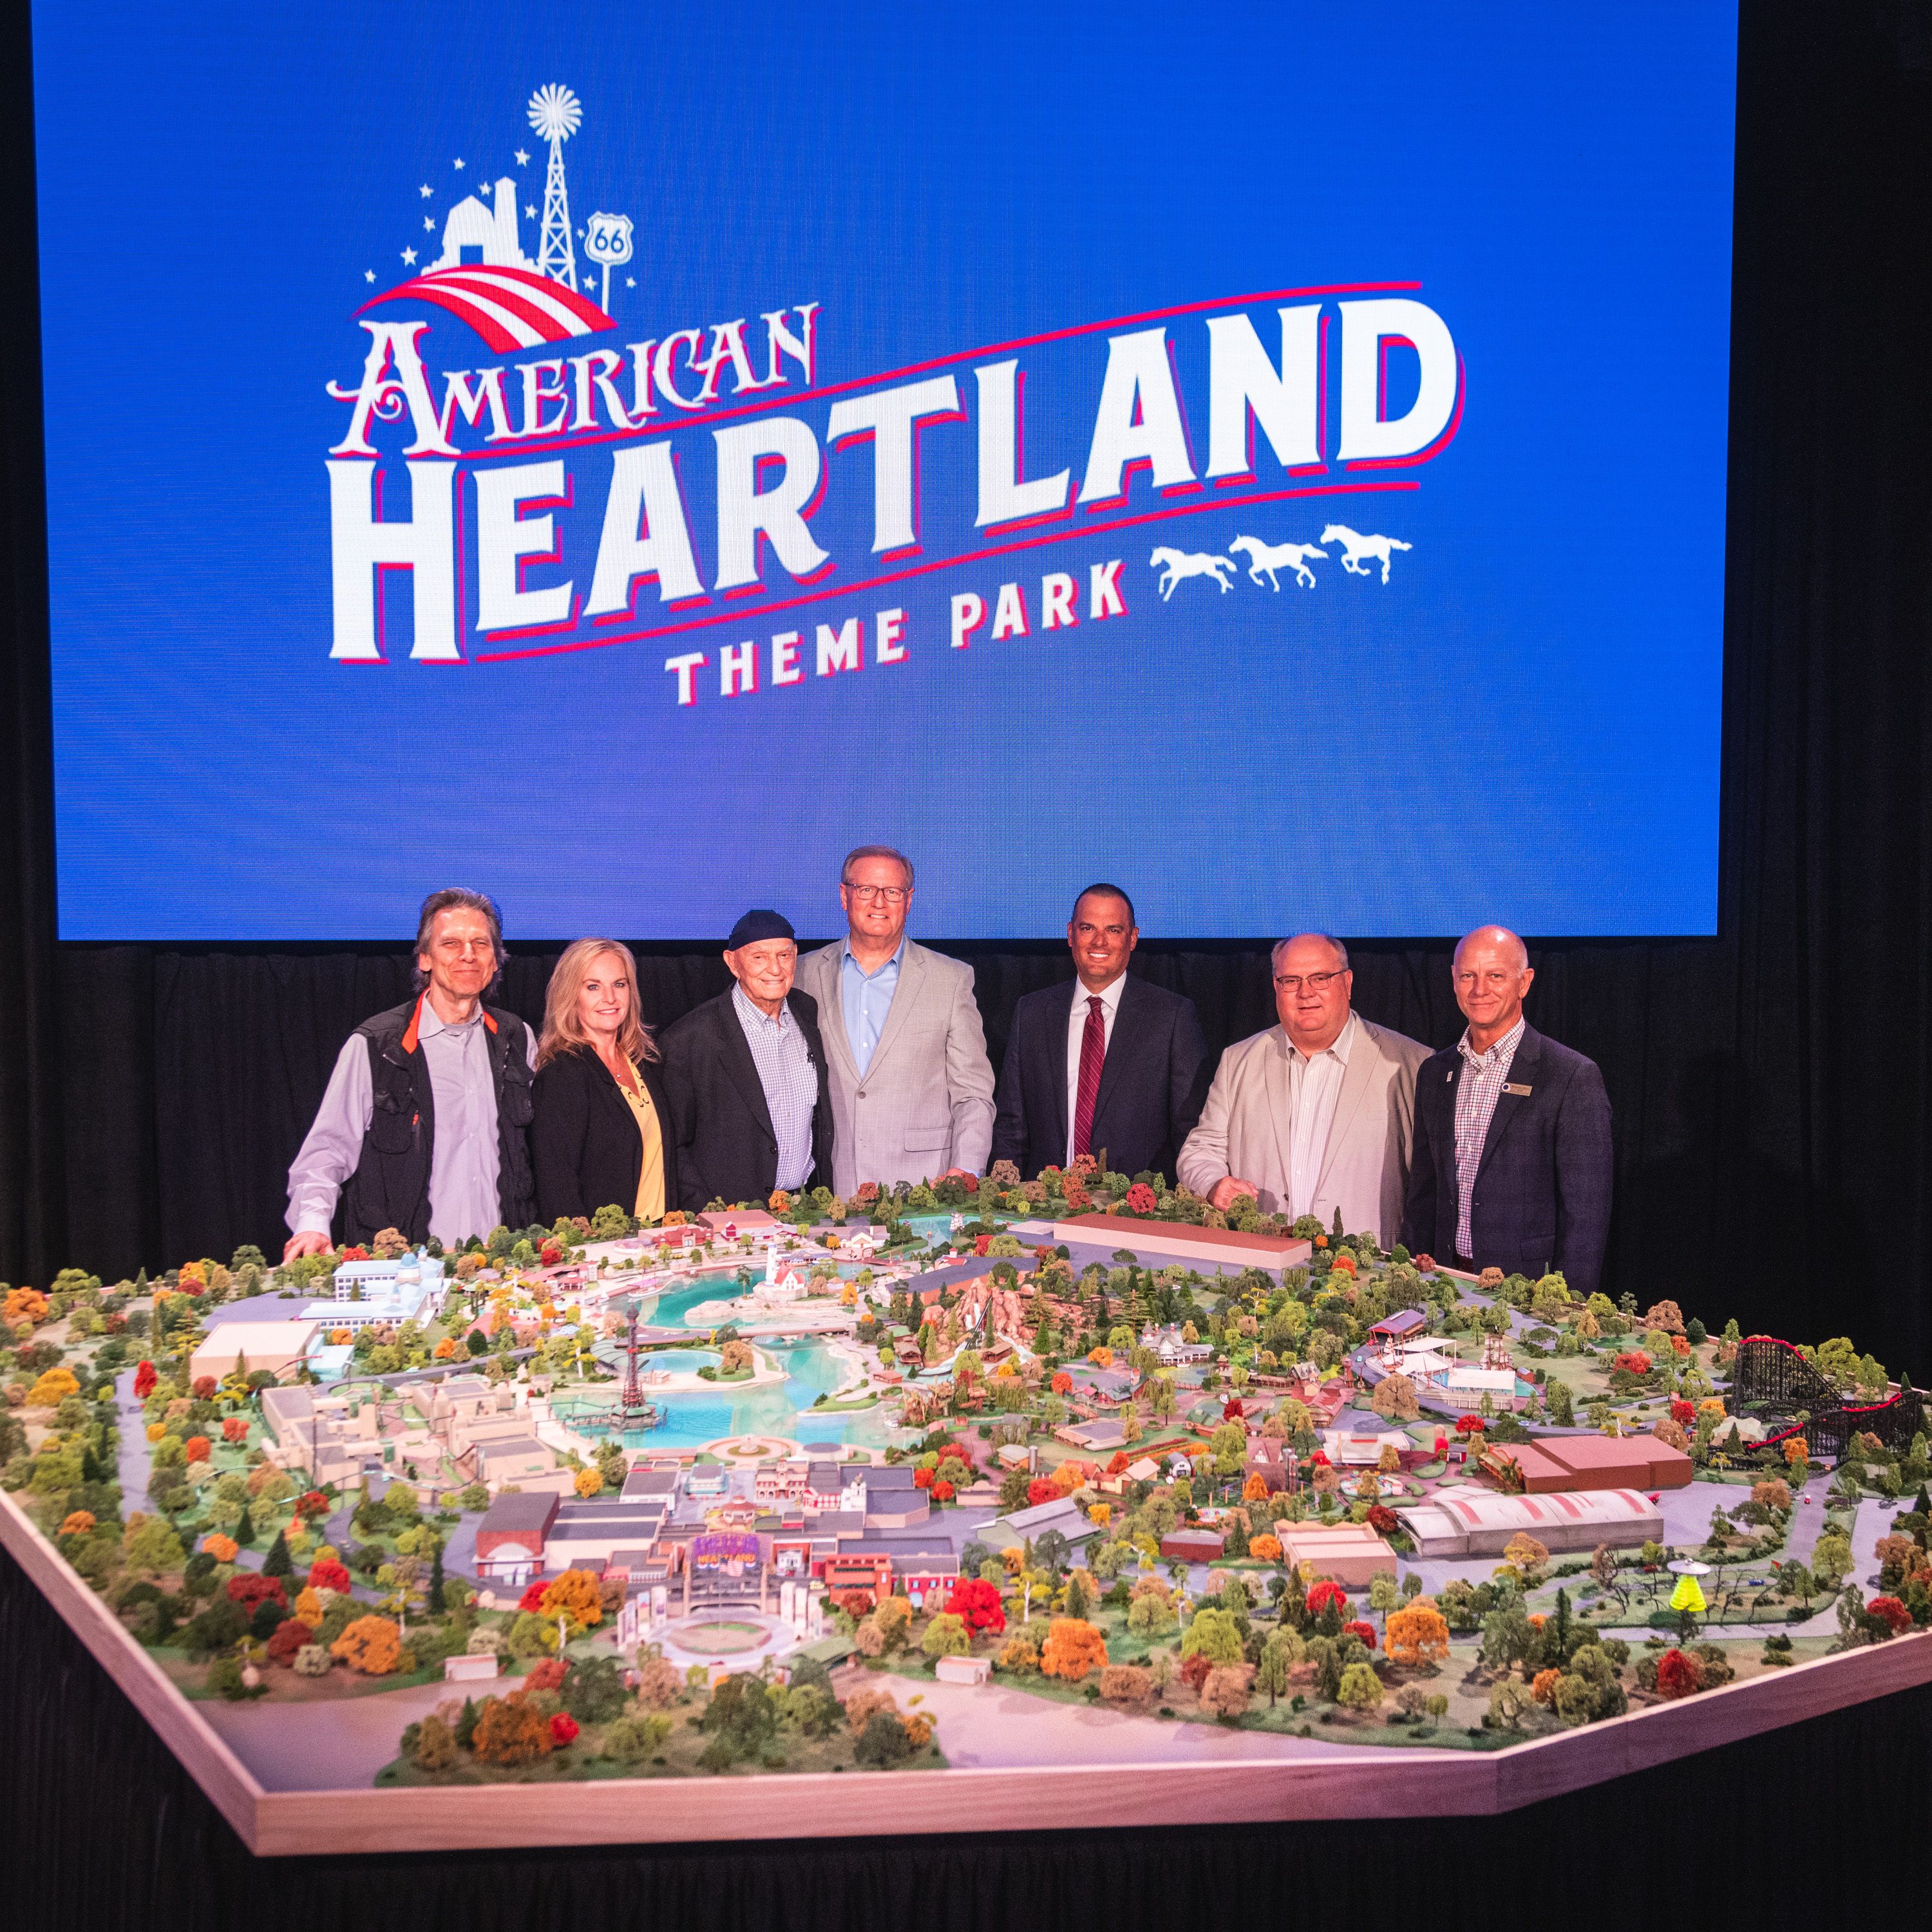 A New $2B 'Americana' Theme Park Is Opening in Oklahoma